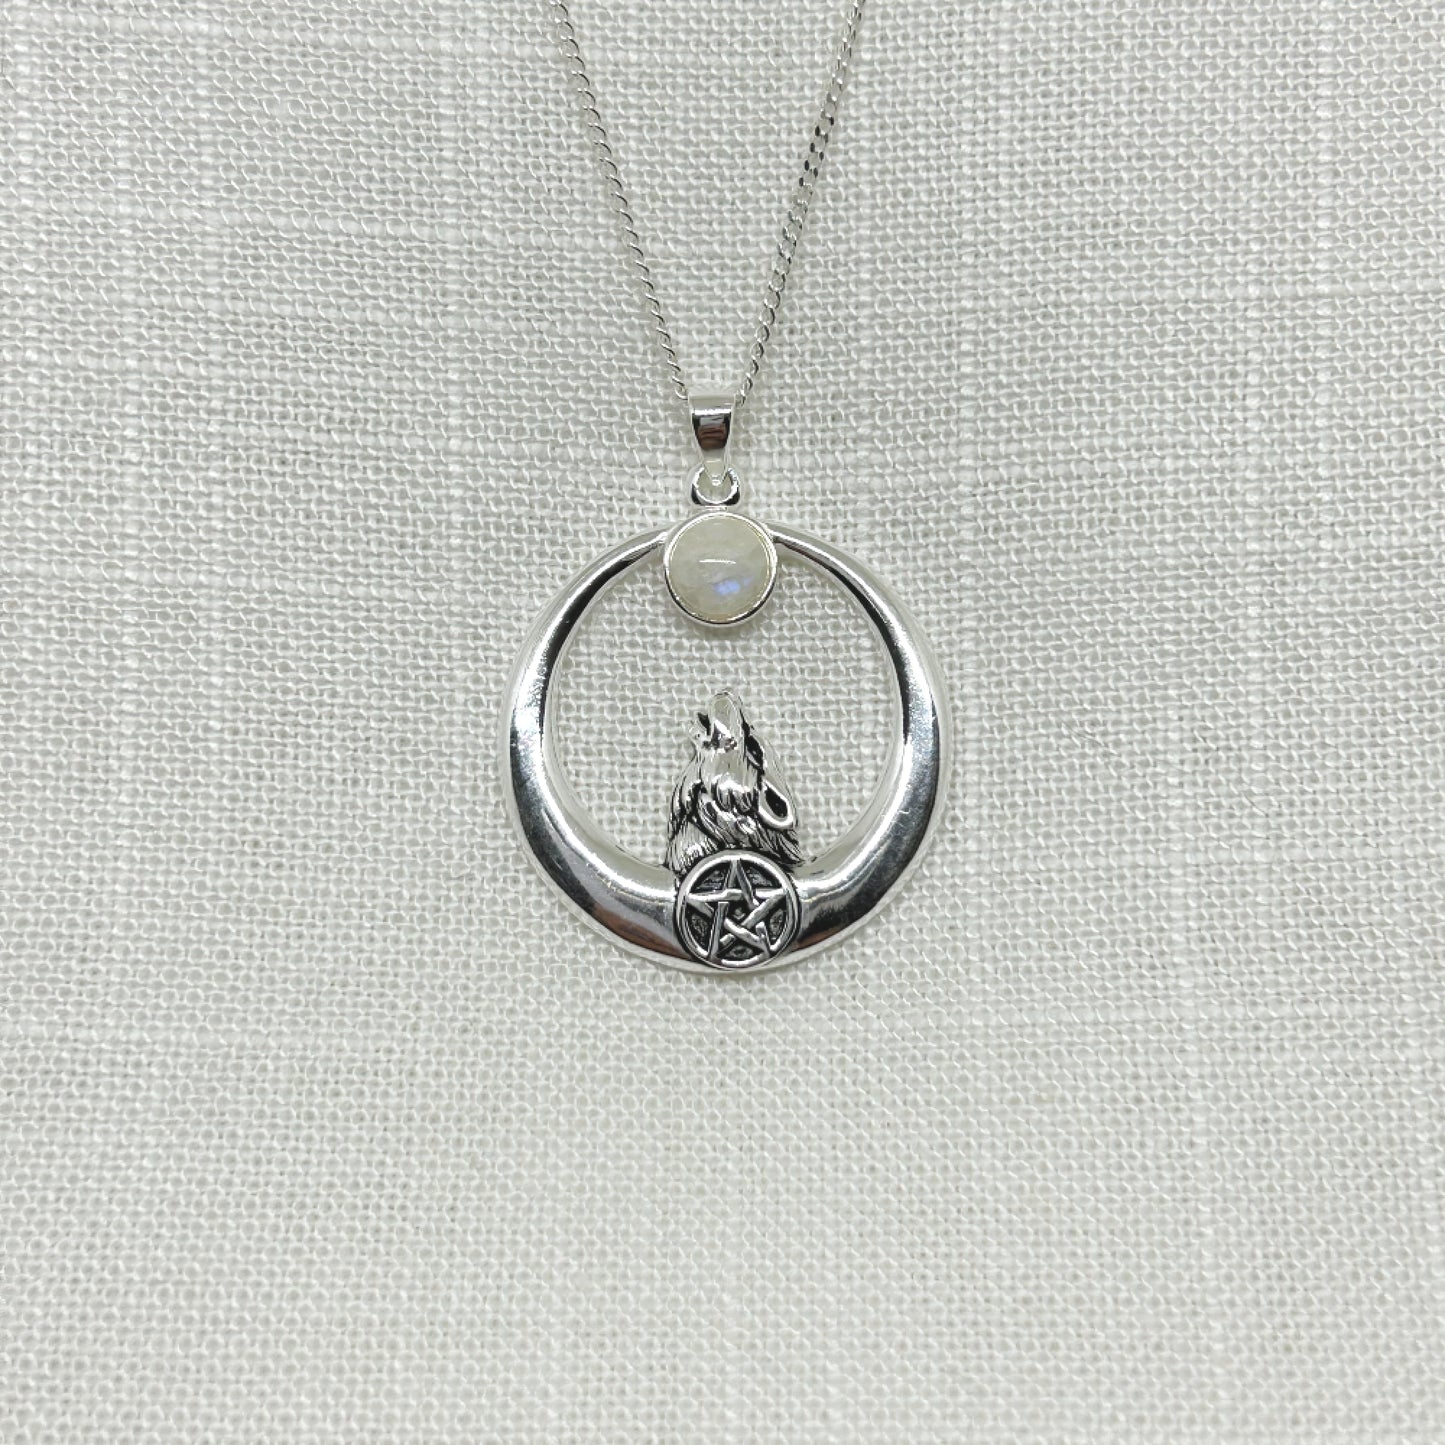 A lone wolf has his head tilted back, gazing up to the full moon, set with a moonstone. Below his neck is a pentacle symbol. Pendant is 3.75cm high and has been slightly oxidized to enhance the detail. It comes complete with a 20 inch silver cable chain.